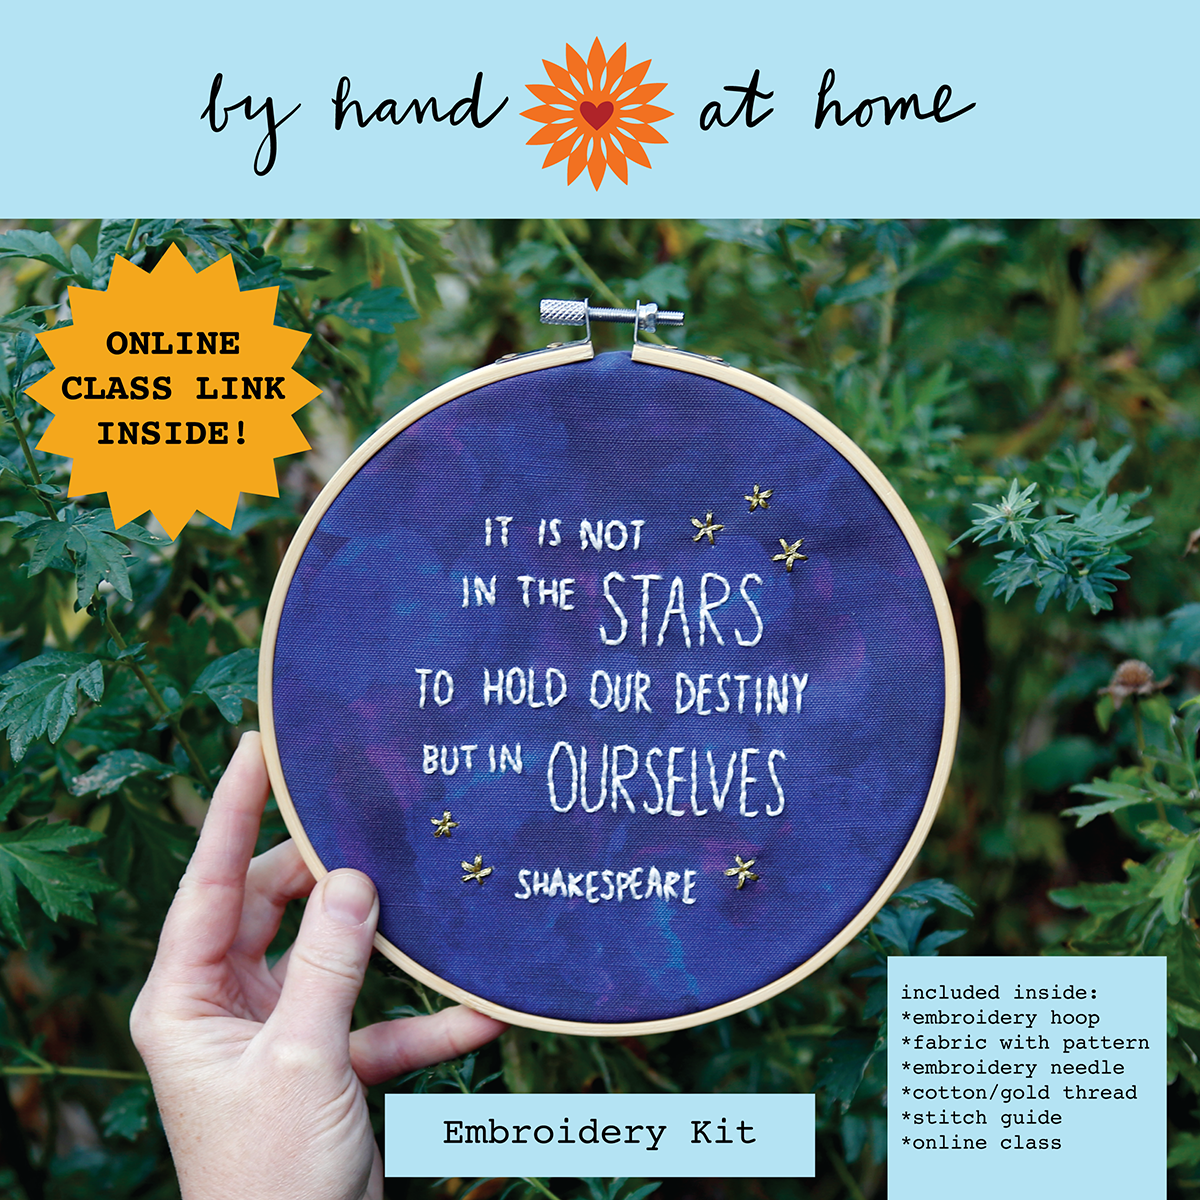 Stars Shakespeare Quote embroidery kit!